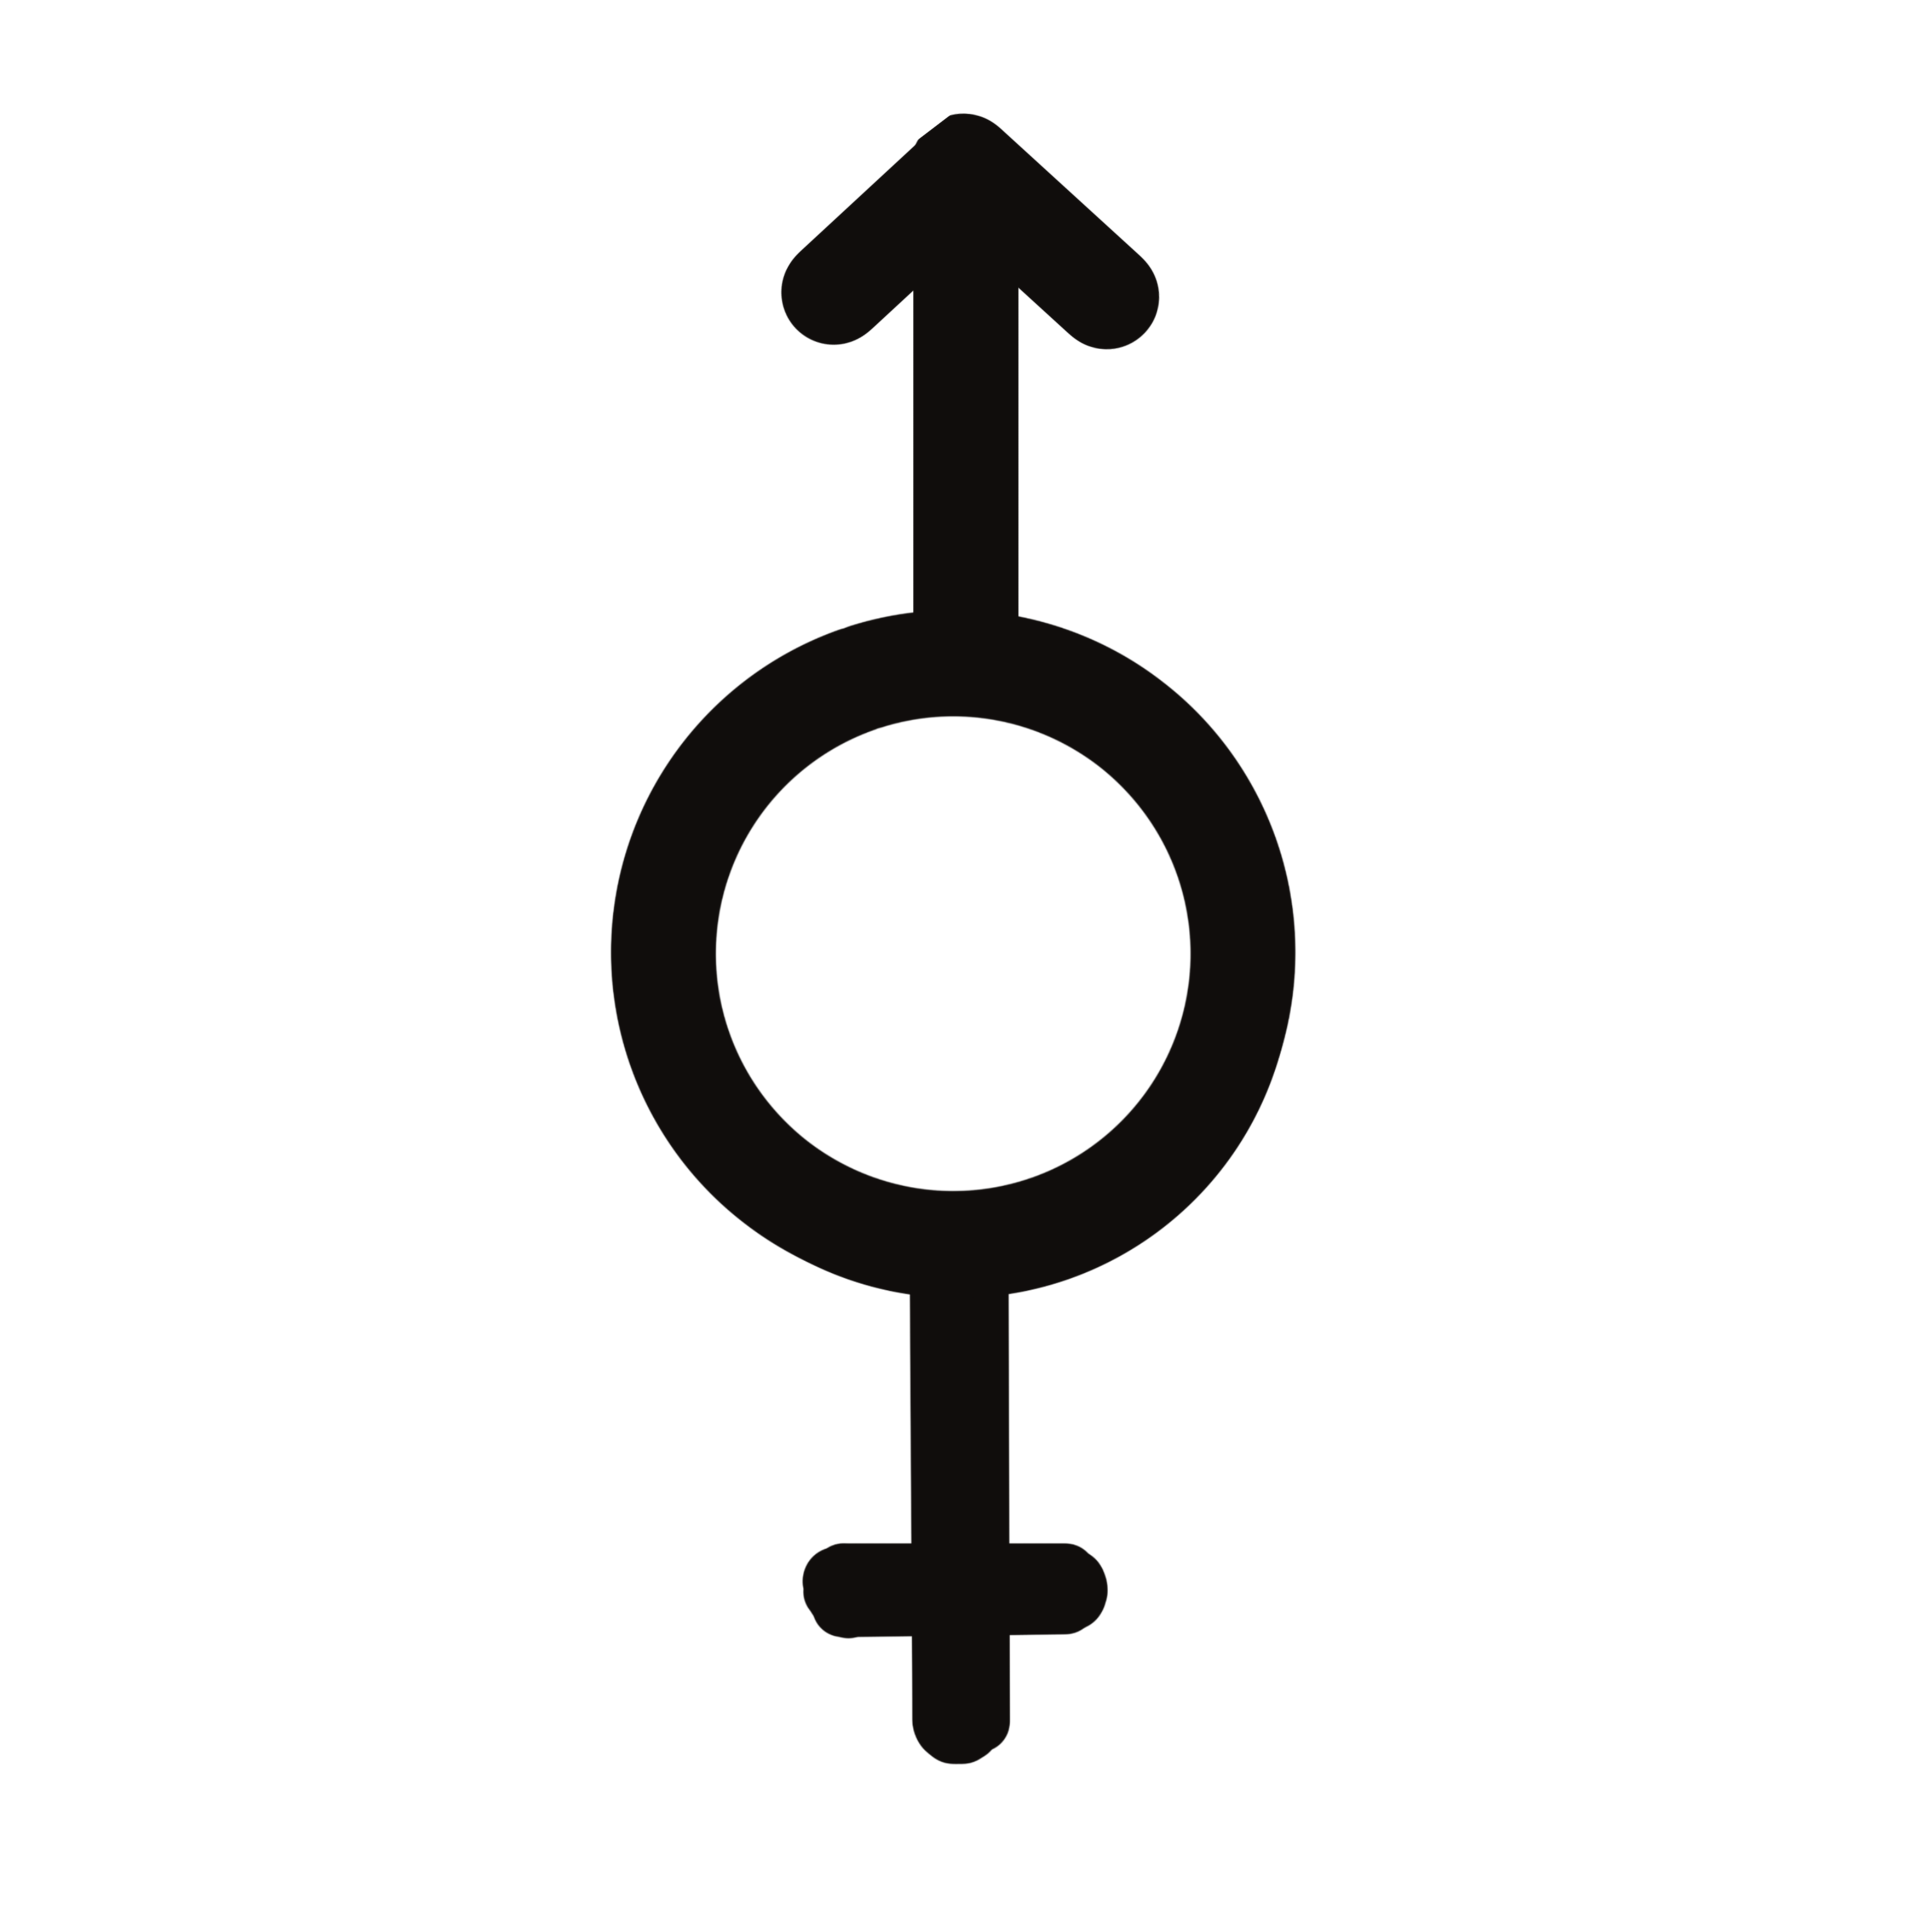 Sex Symbol Male Female Equality Gender Equality Sex Chromosomes Sexuality Equal Third